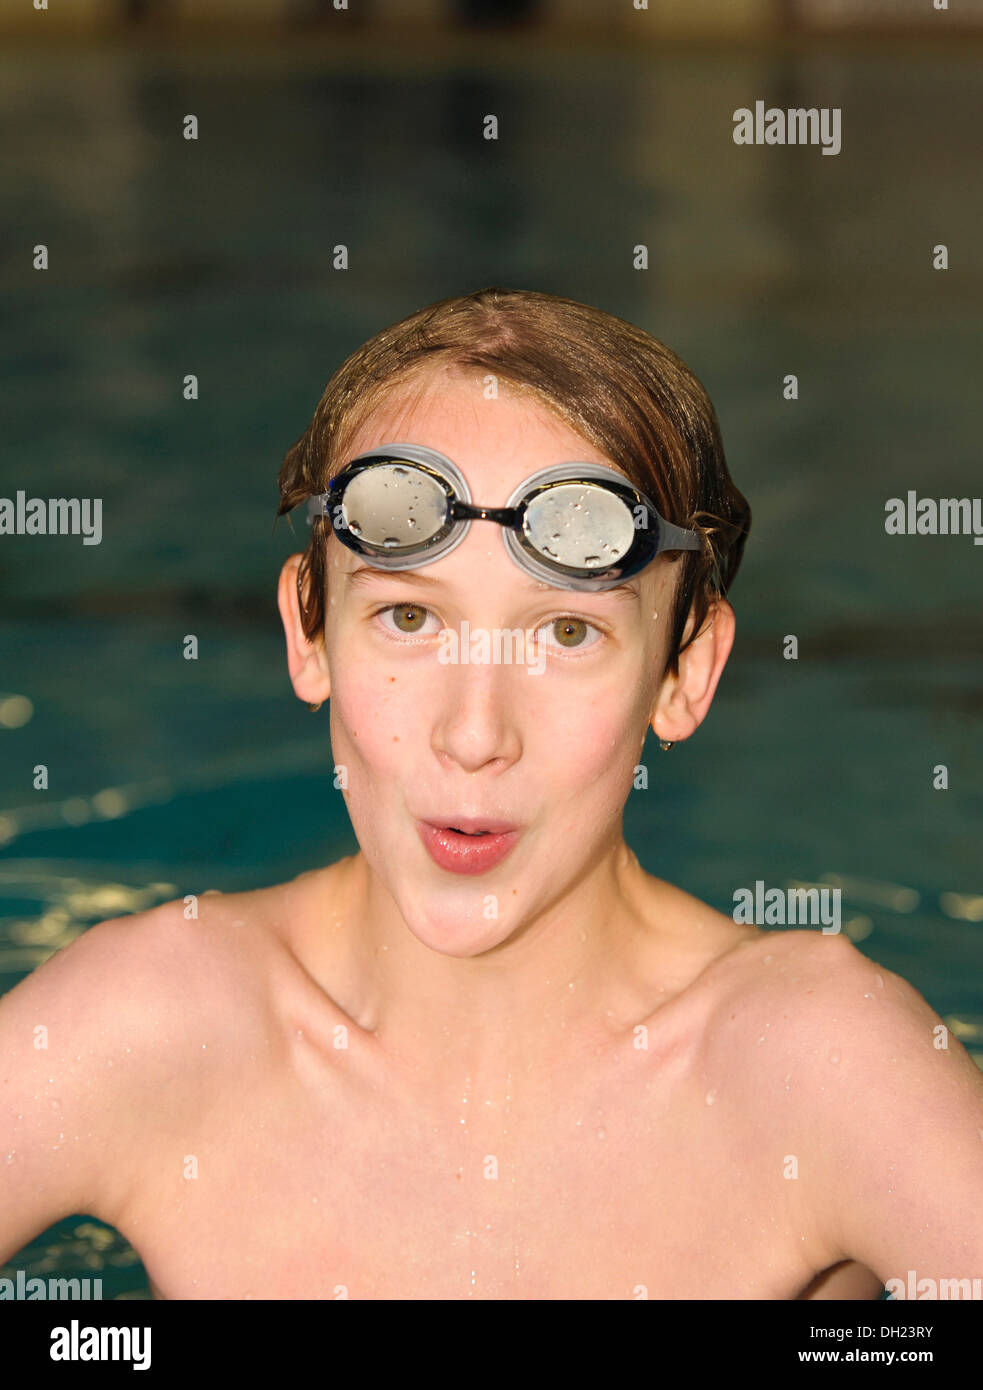 Boy, swimmer, 12 or 13 years, with swimming goggles in a swimming pool Stock Photo